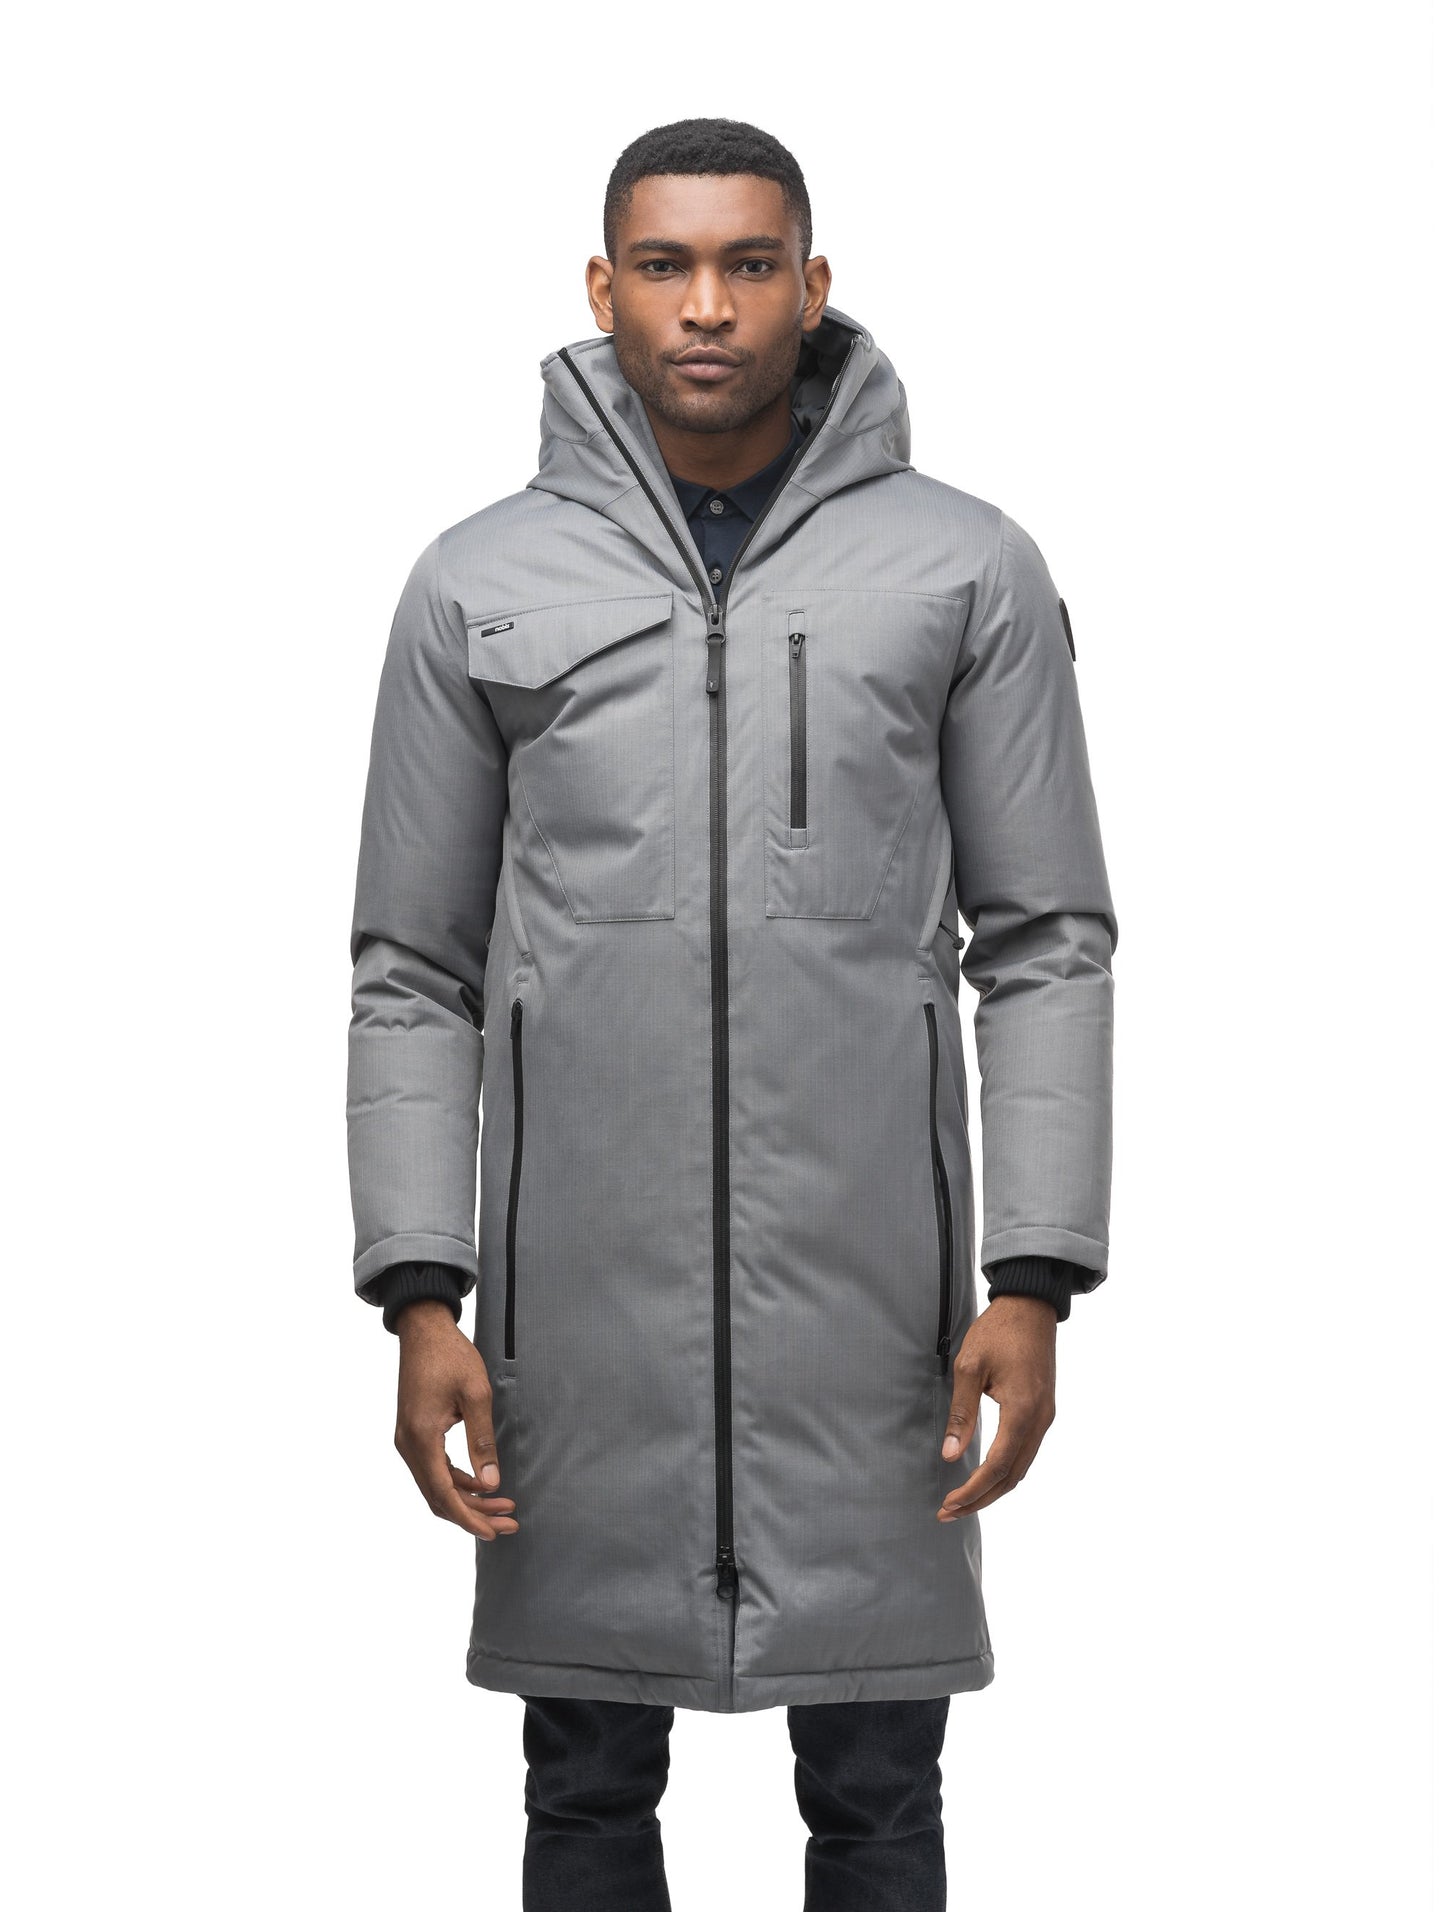 Long men's calf length parka with down fill and exposed zipper that features spacious pockets and zippered vents in Concrete